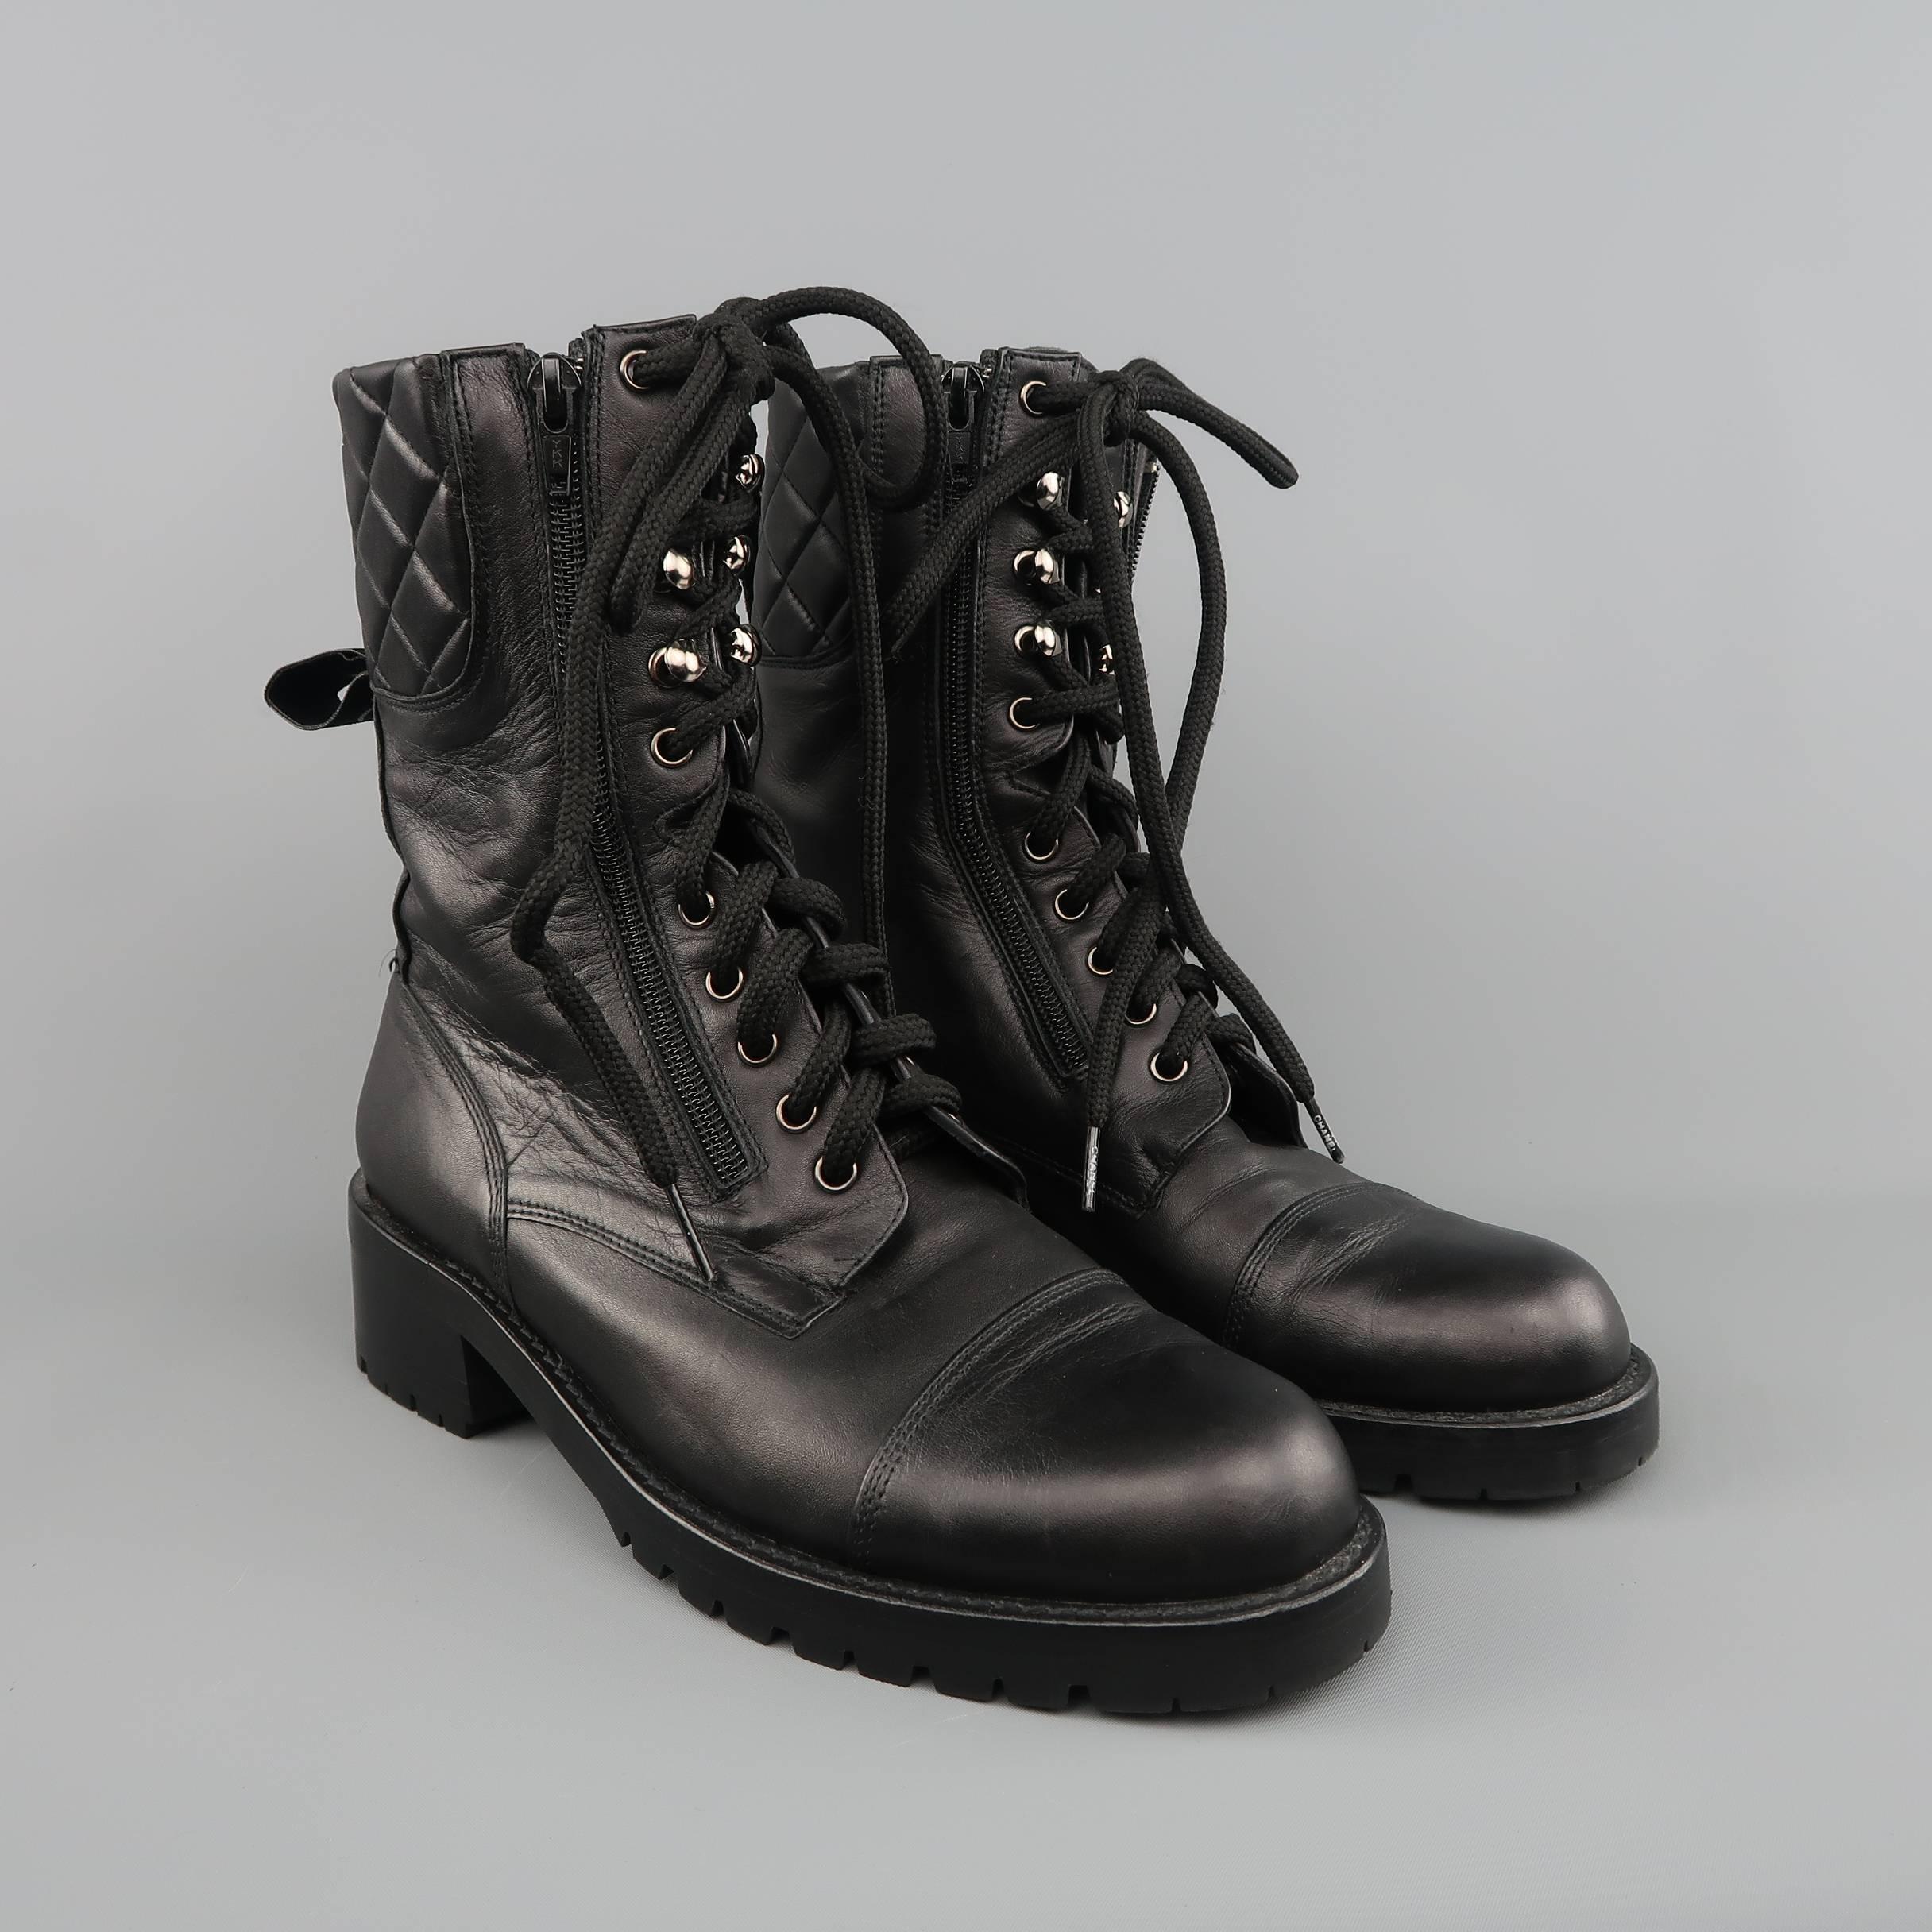 CHANEL combat style boots come in black smooth leather and feature a cap toe, lace up front with grommets and hooks, double zip closure, logo embossed tongue, quilted ankle, heeled commando sole, and logo back tabs. Made in Spain.
 
Excellent